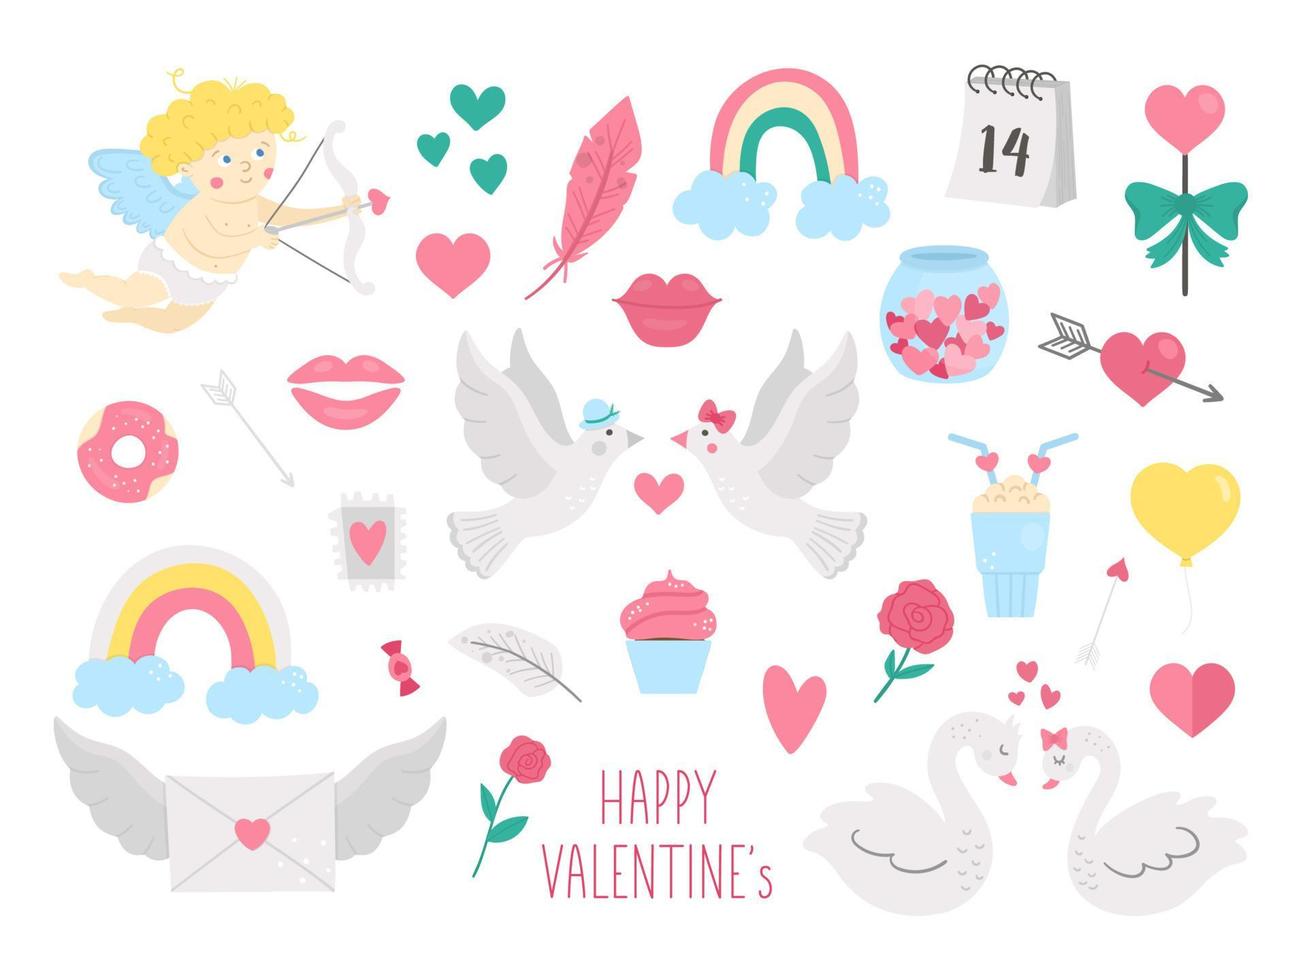 Vector set of Saint Valentines day symbols. Collection of cute characters and objects with love concept. Cupid, doves, hearts and swans isolated on white background. February holiday illustration